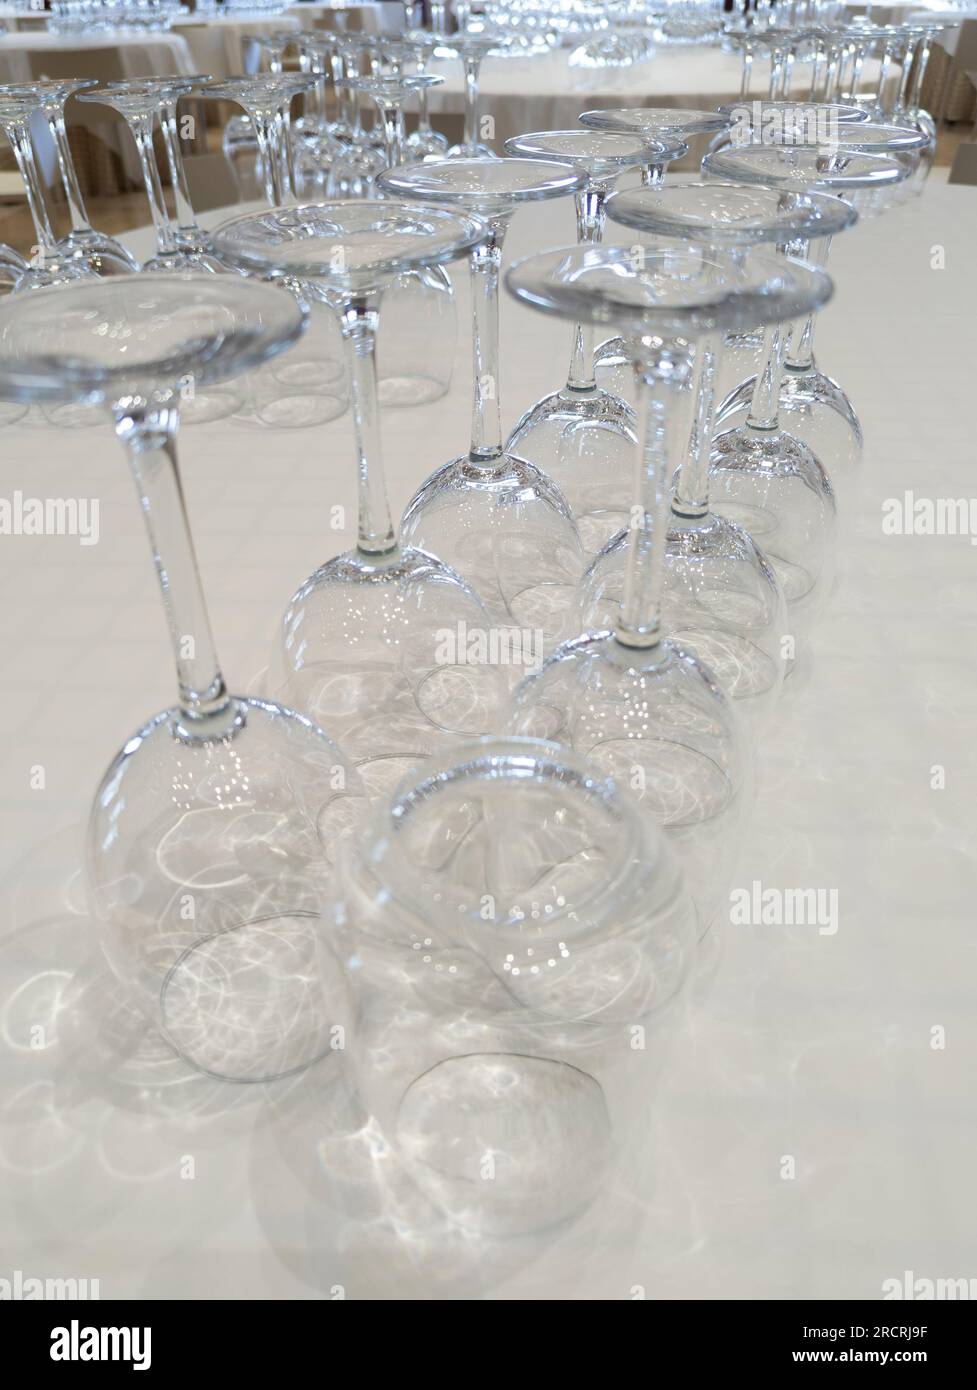 The Art of Wine Appreciation: A Captivating Scene at a Refined Restaurant Table, Showcasing an Assortment of Empty Wine Glasses, an Invitation to Deli Stock Photo